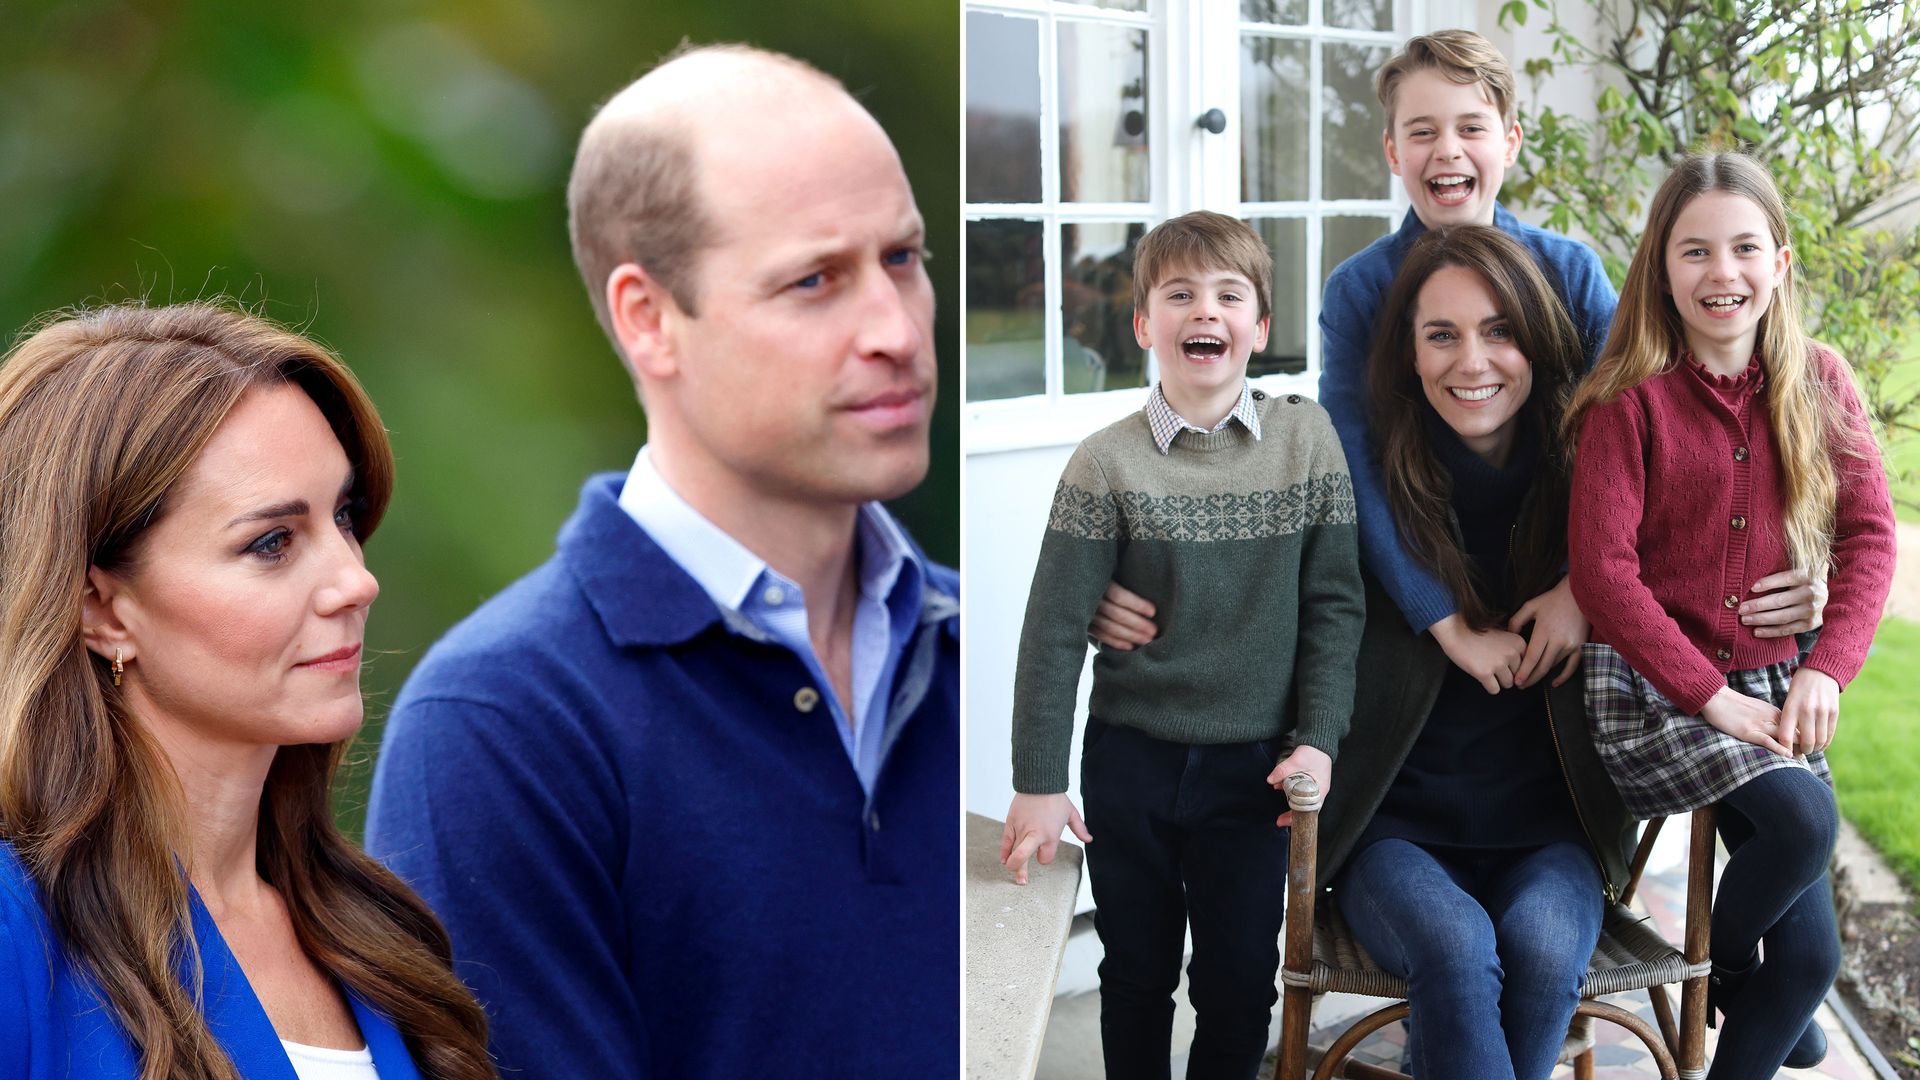 Prince William and Kate have released a statement following criticism over their Mother's Day photo